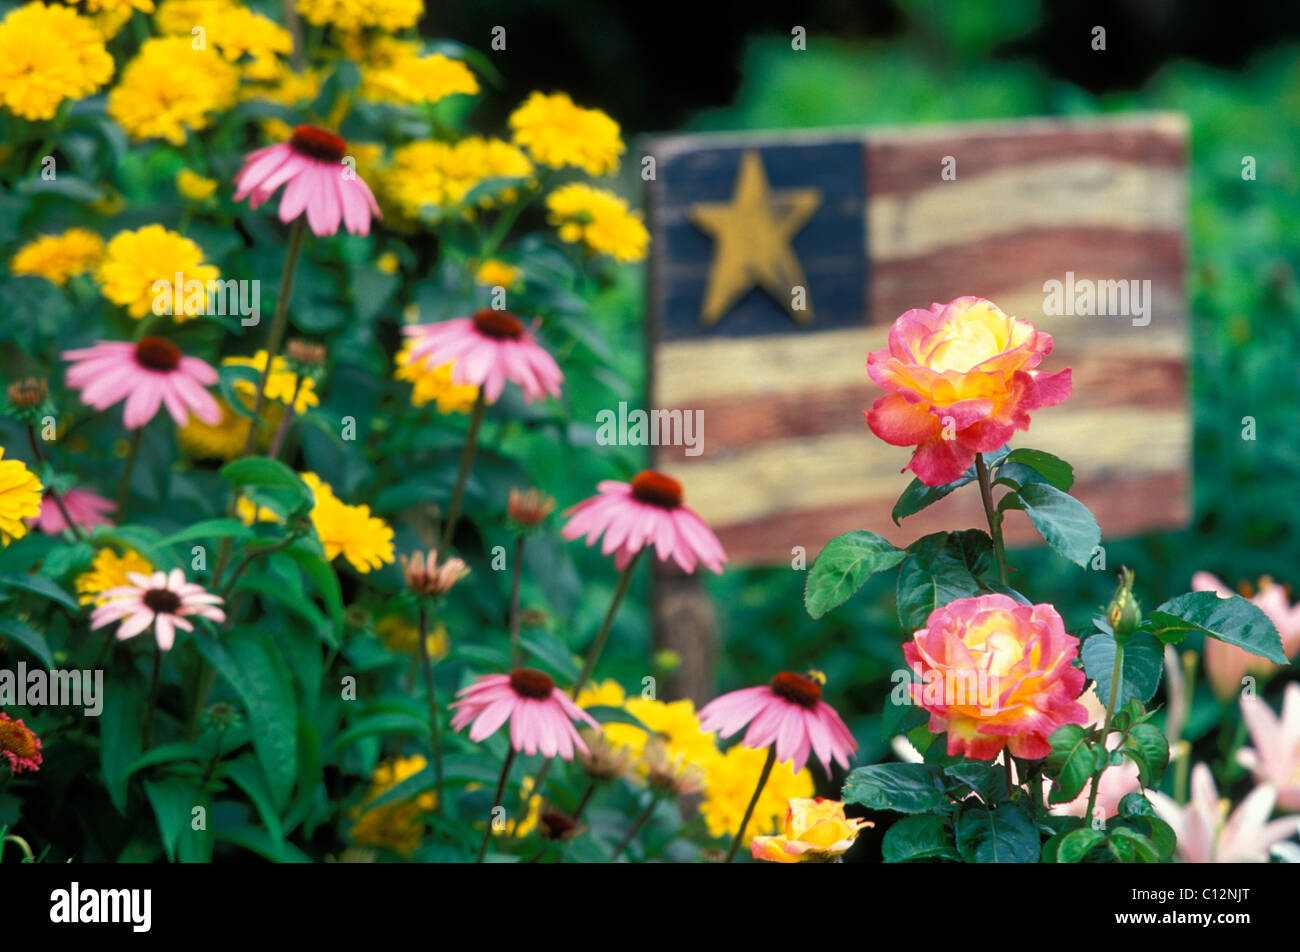 'LOVE AND PEACE' HYBRID TEA ROSES, PURPLE CONEFLOWERS AND GIANT MARIGOLDS WITH WOODEN AMERICAN FLAG ACCENT IN AMERICAN GARDEN. Stock Photo